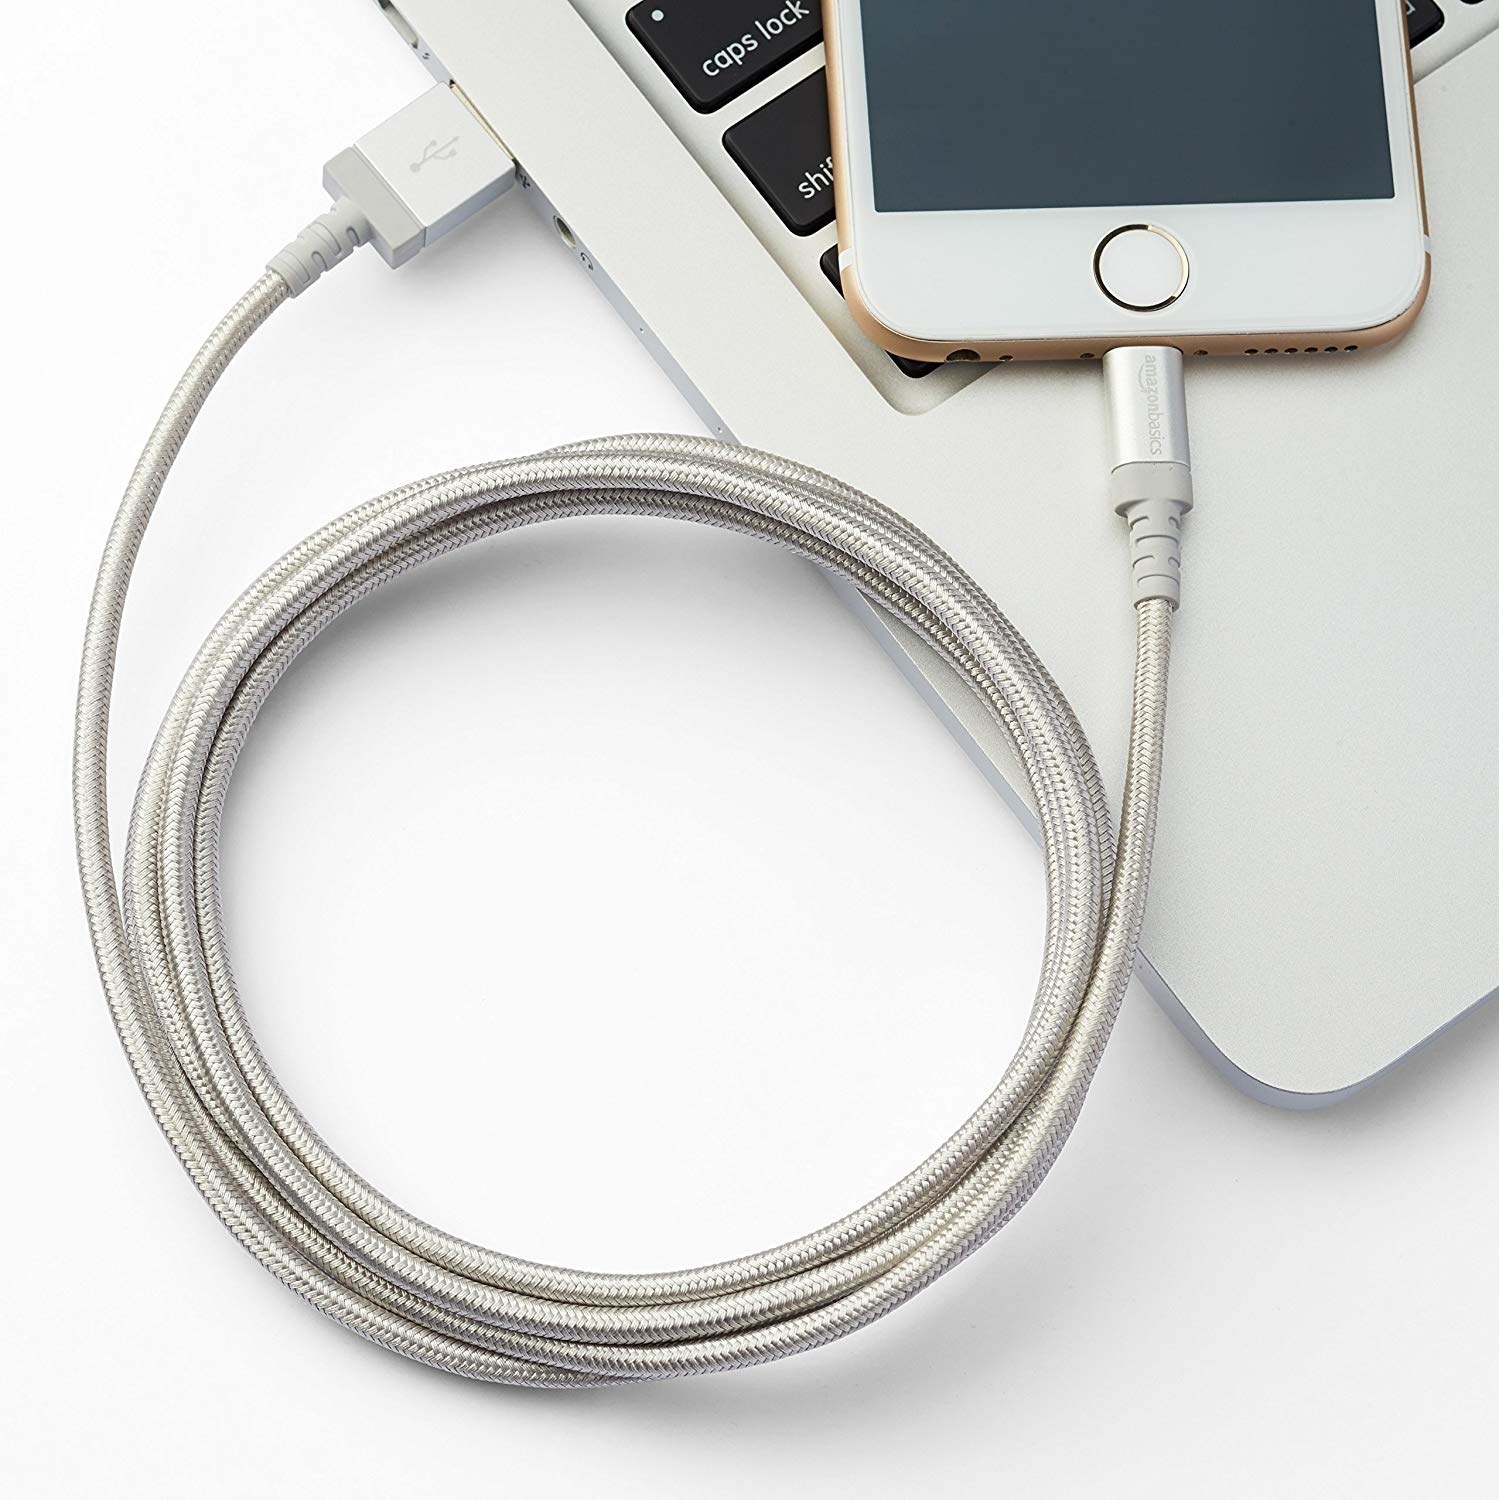 Silver charging cable charging an iPhone through a laptop